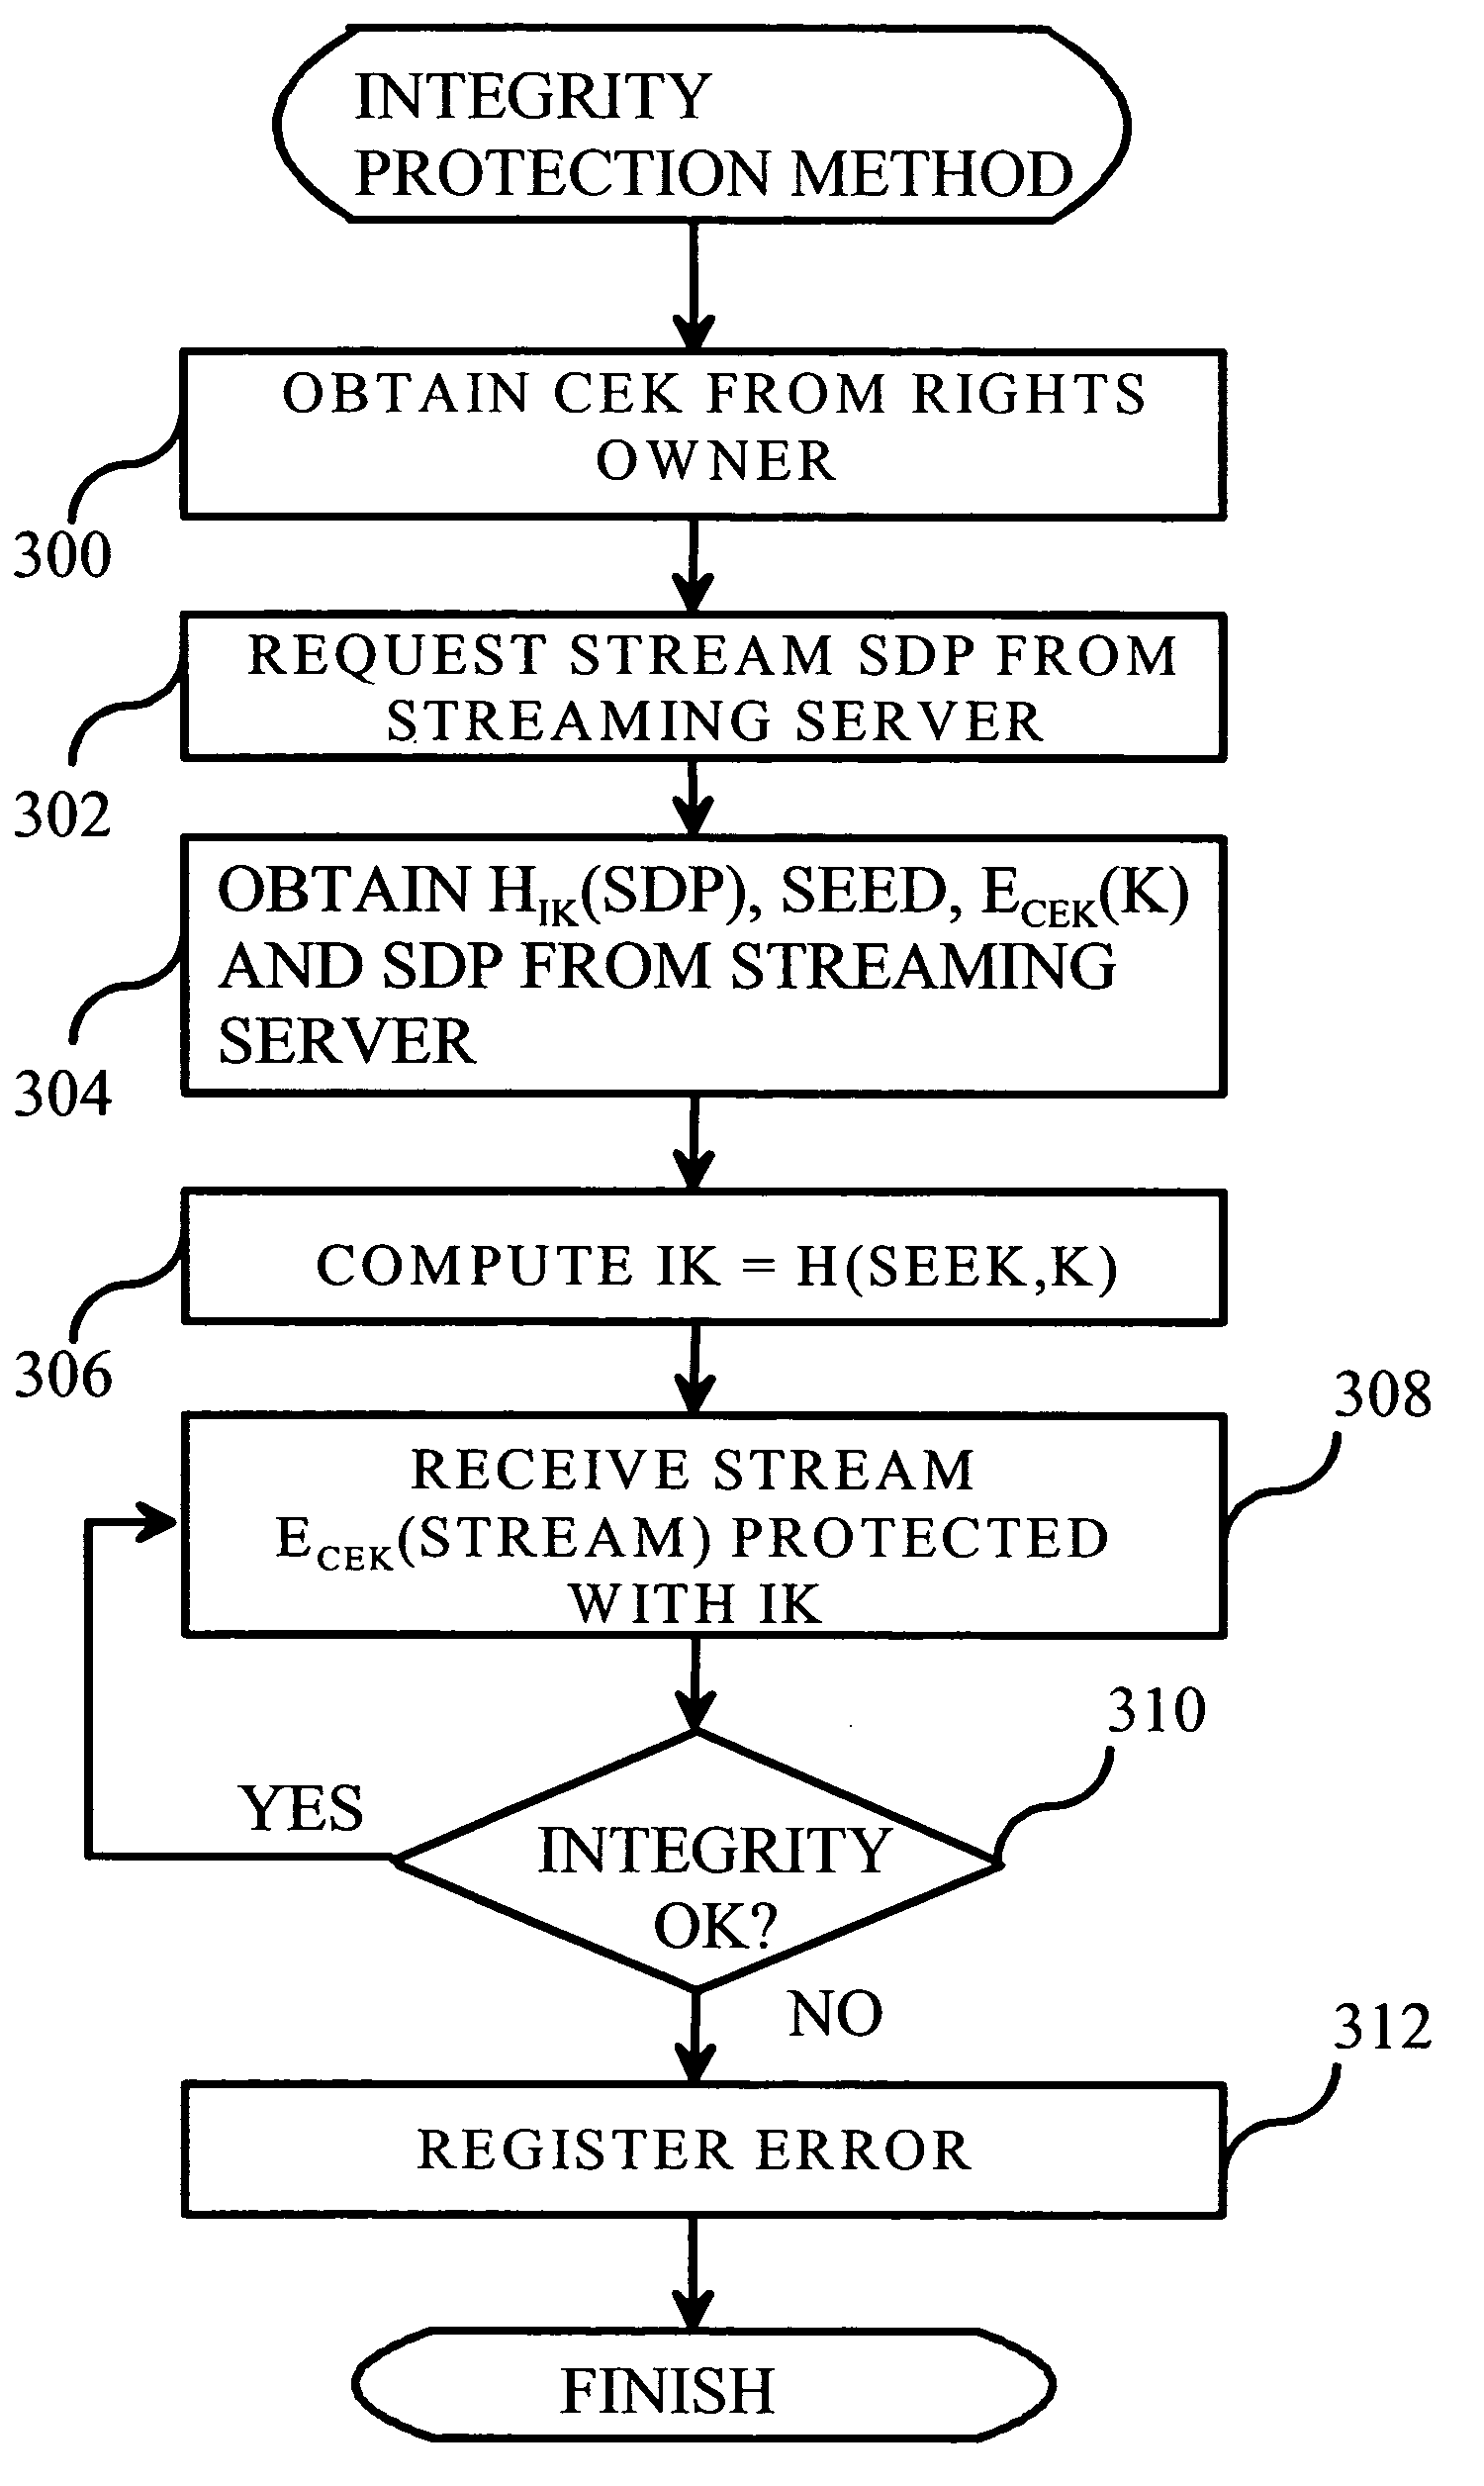 Integrity protection of streamed content